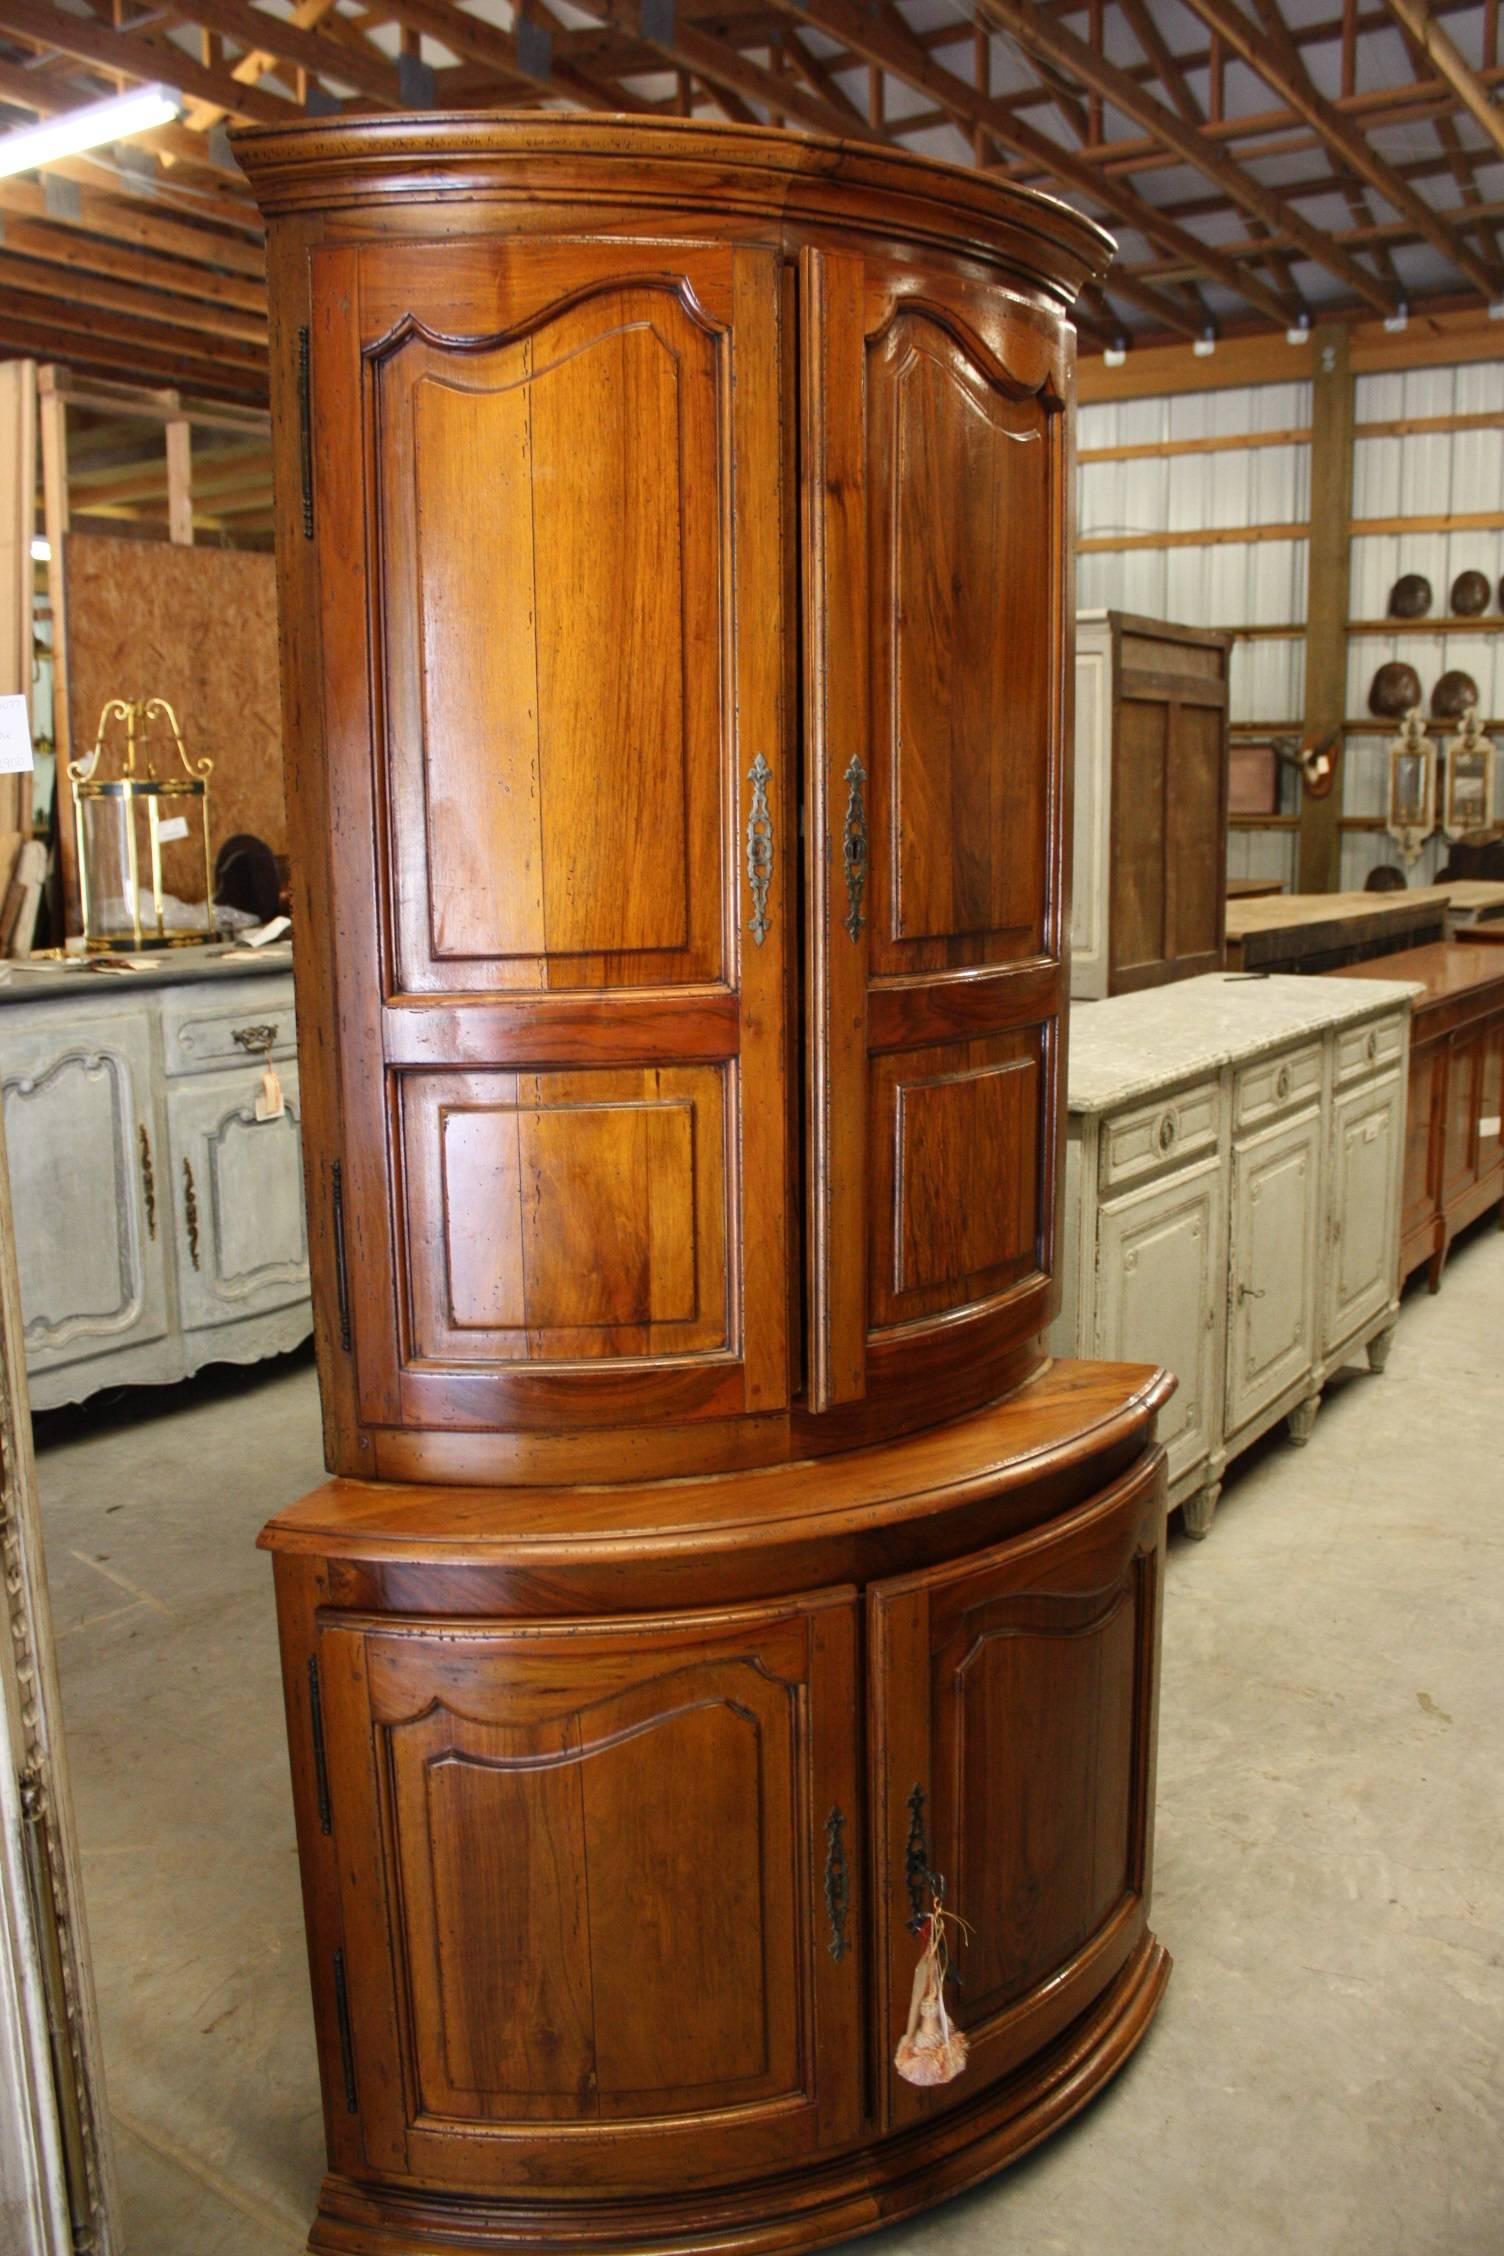 This nicely carved antique corner cupboard was crafted in Southern France, circa 1880. This piece is in great condition with a rich patina.